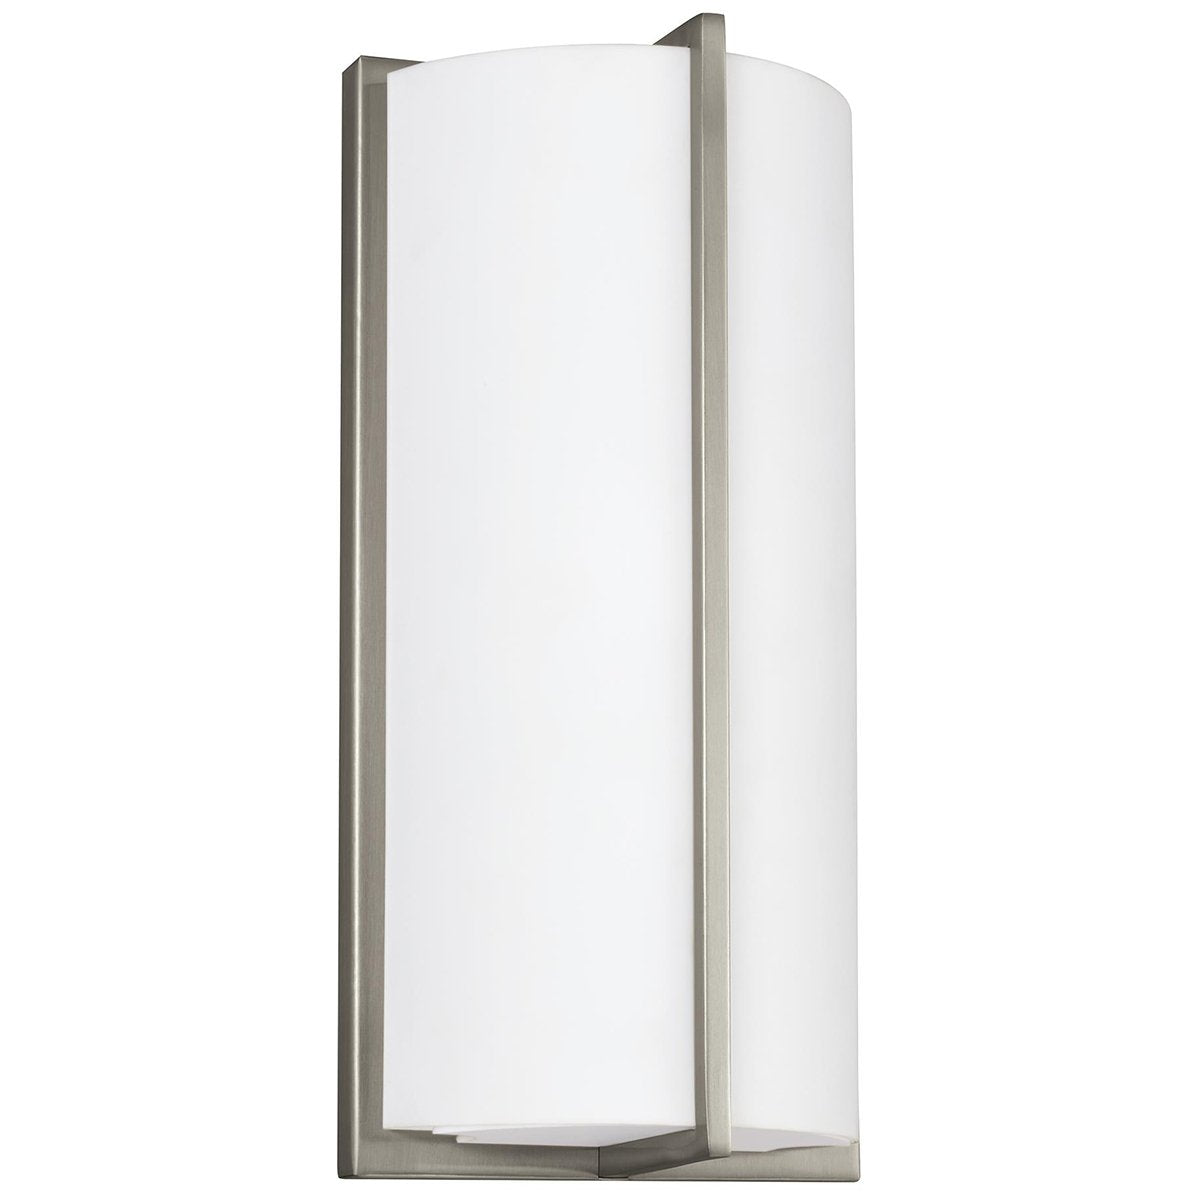 Sea Gull Lighting LED Wall Sconce - Brushed Nickel